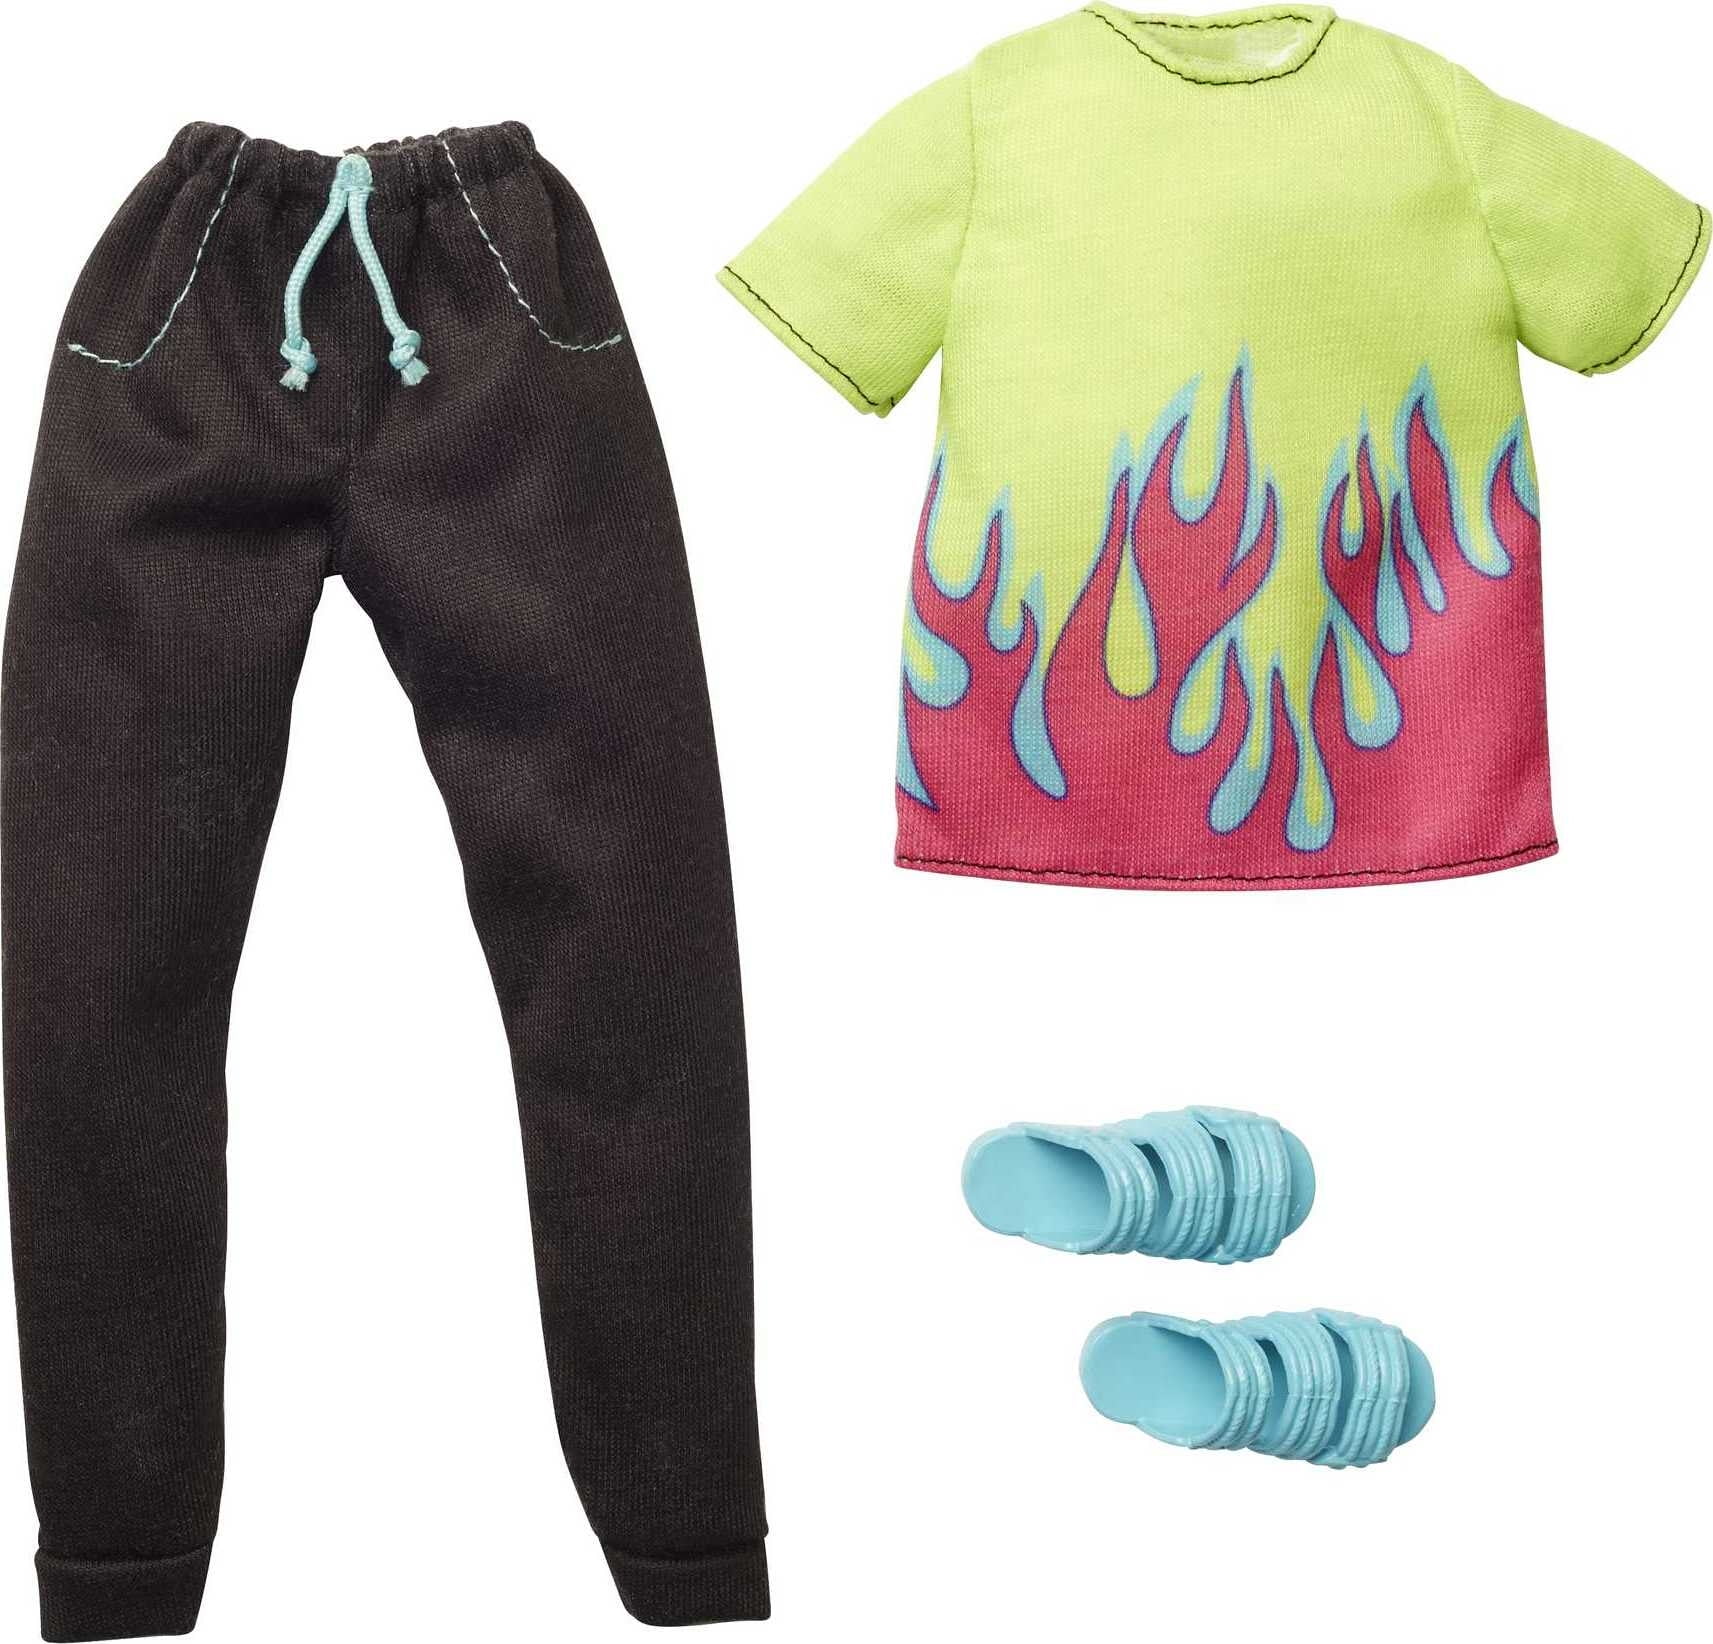 Barbie Fashions, Ken Doll Clothing with Neon Flame Shirt, Black Pants and Slide Sandals